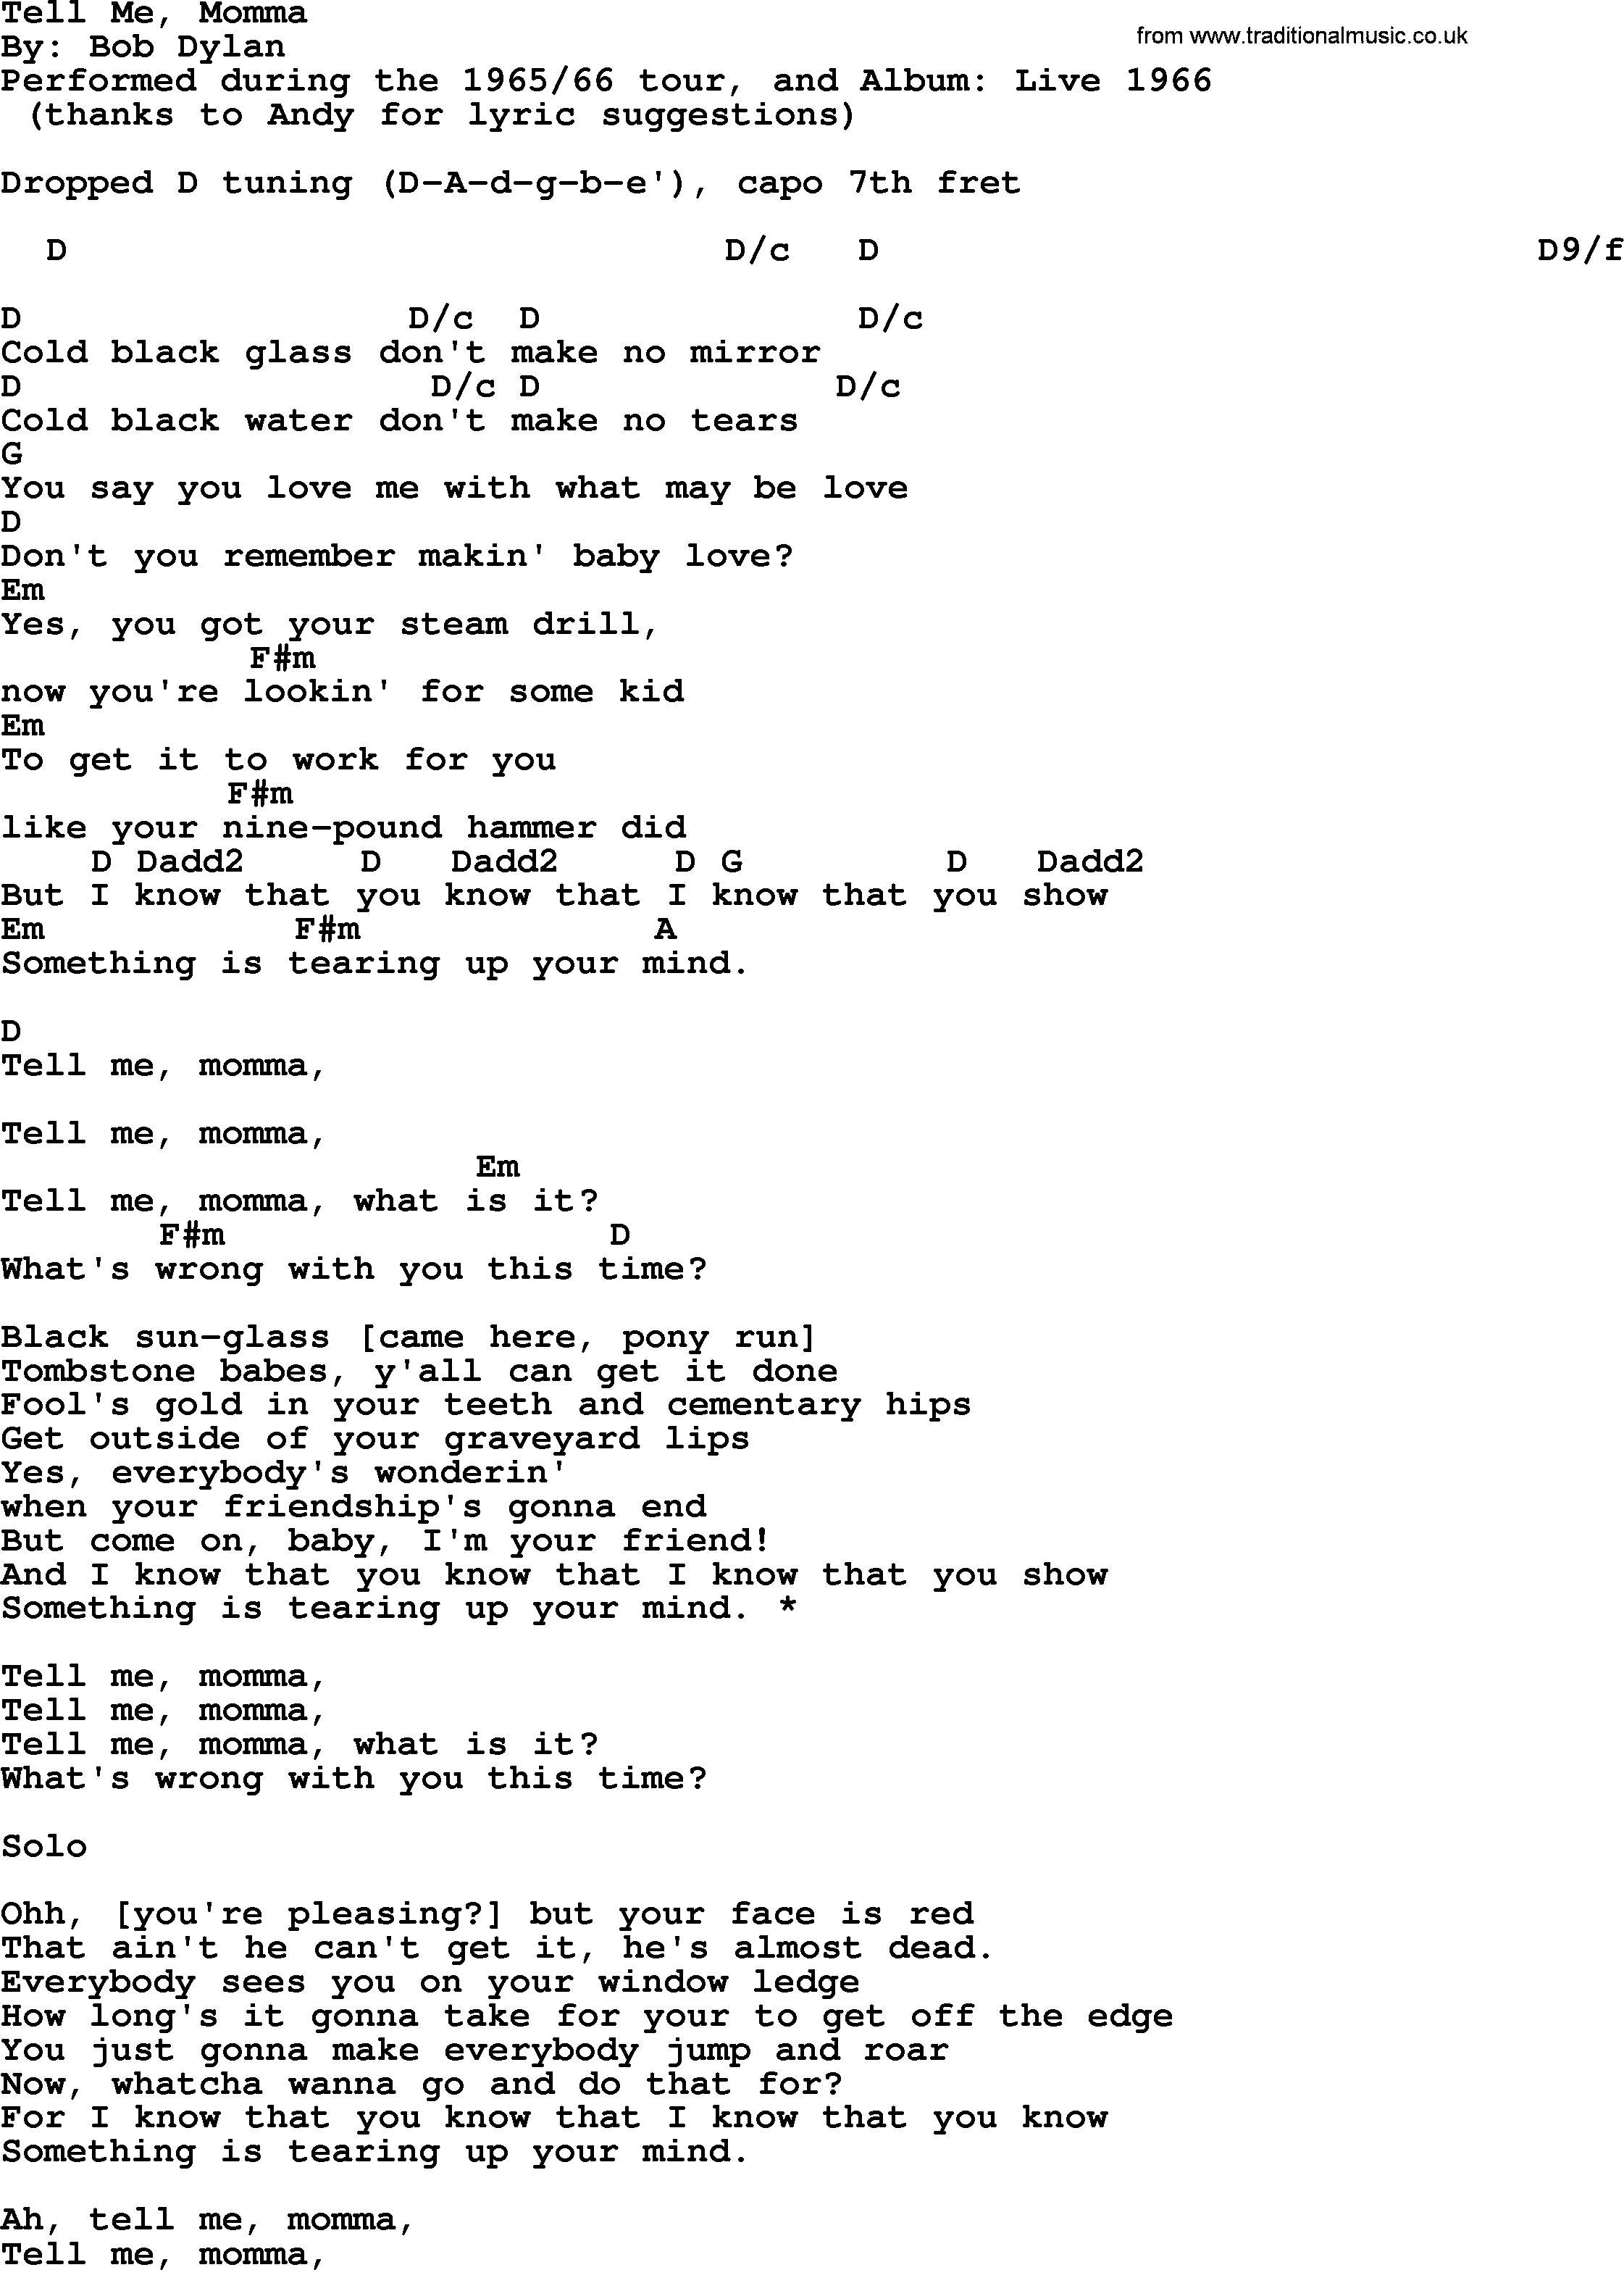 Bob Dylan song, lyrics with chords - Tell Me, Momma